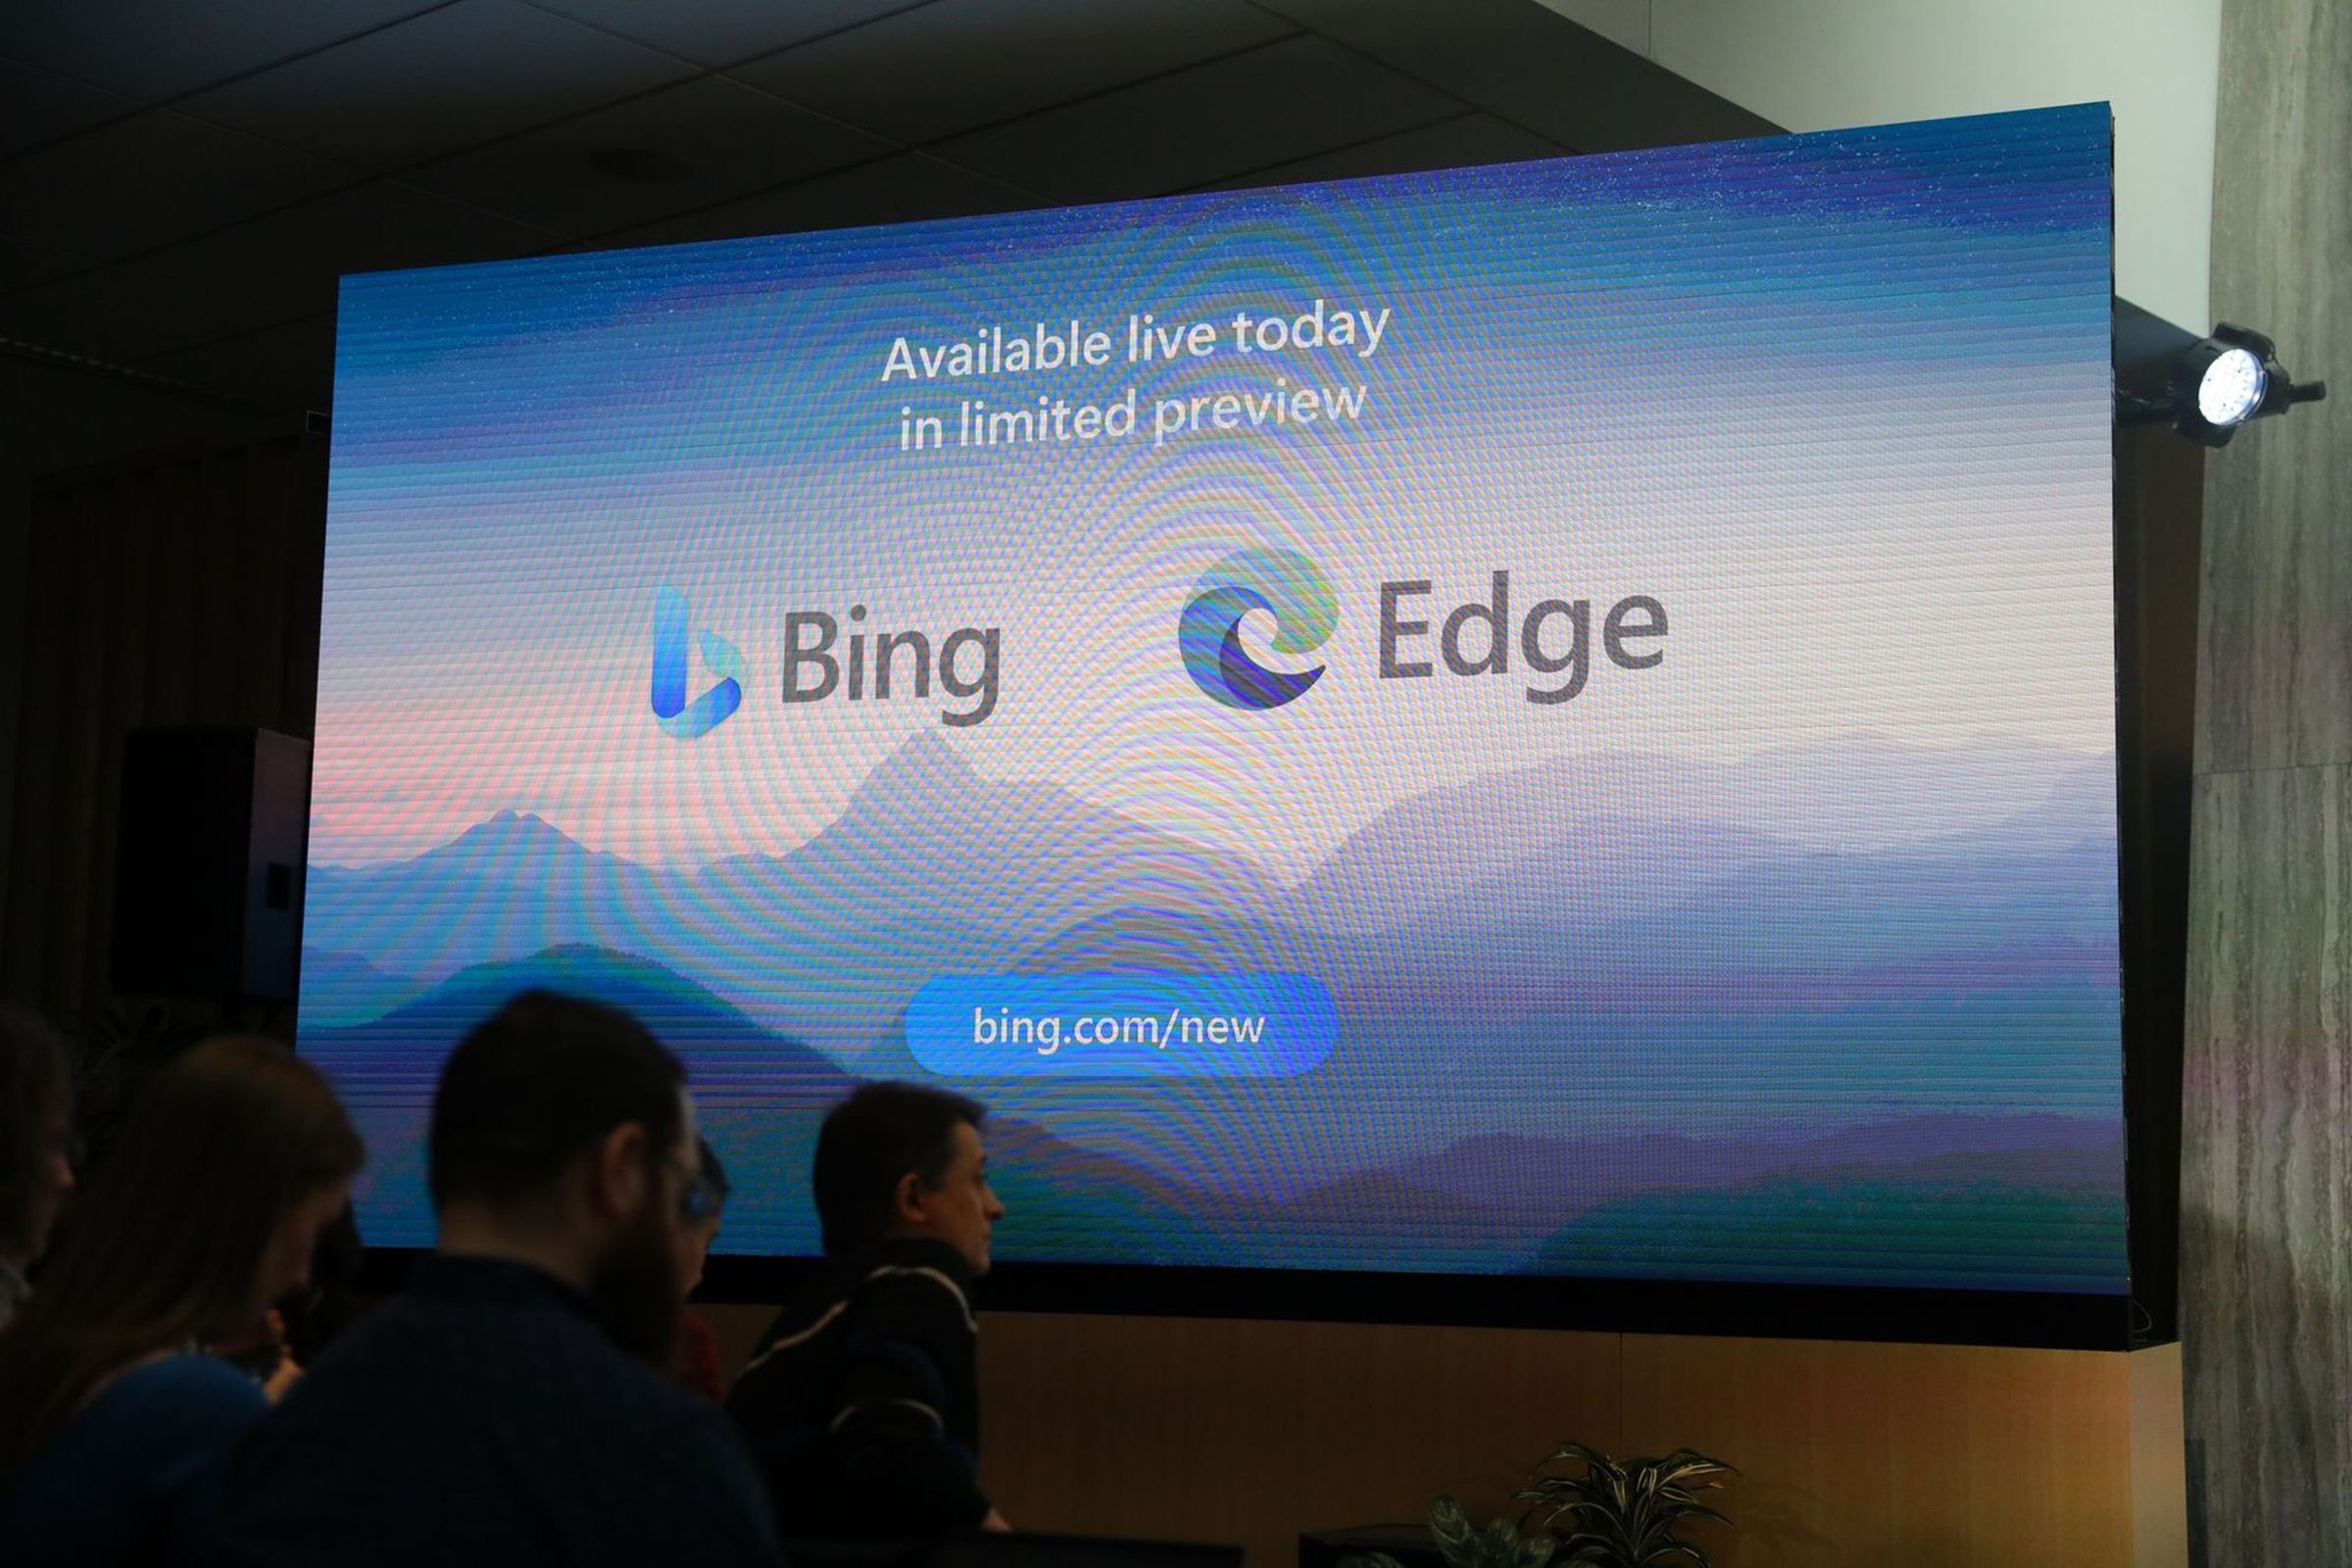 A photo of a slide saying “available today in limited preview” with logos of Bing and Edge beneath. It lists a website bing.com/new.